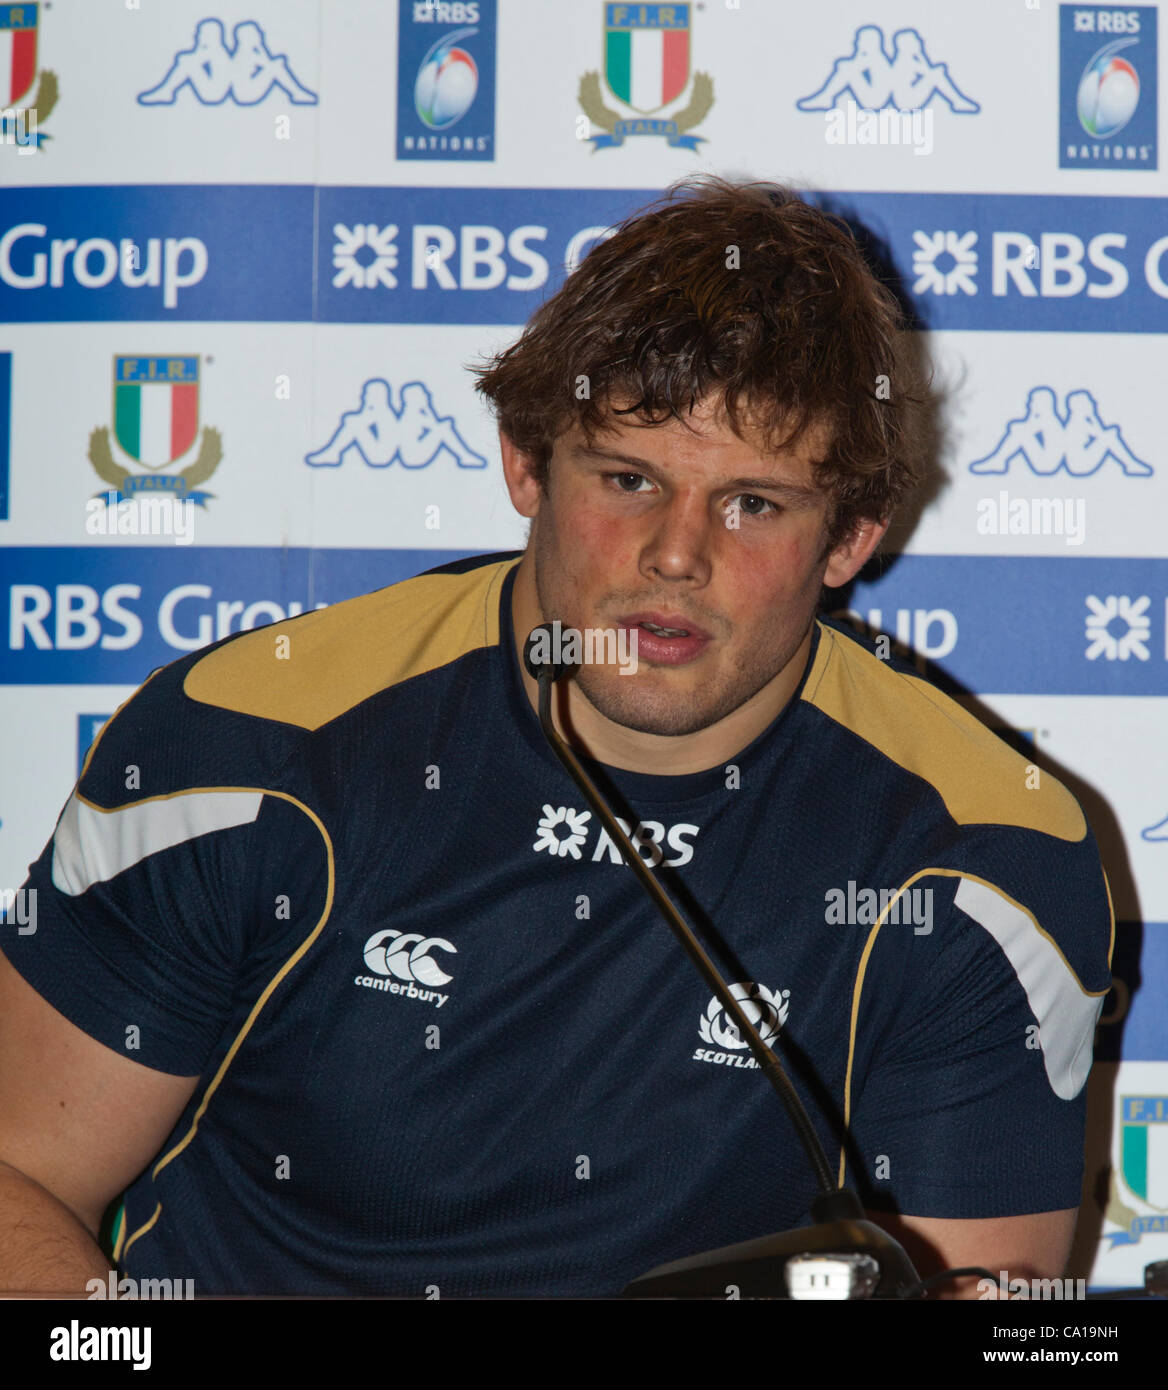 ROME, ITALY, SATURDAY, MARCH 17TH 2012. Six Nations Rugby. Italy vs Scotland. Post match press conference. Scottish team captain Ross Ford.  Italy beat Scotland 13-6 at the Stadio Olimpico in Rome to leave Scotland with the wooden spoon. Stock Photo